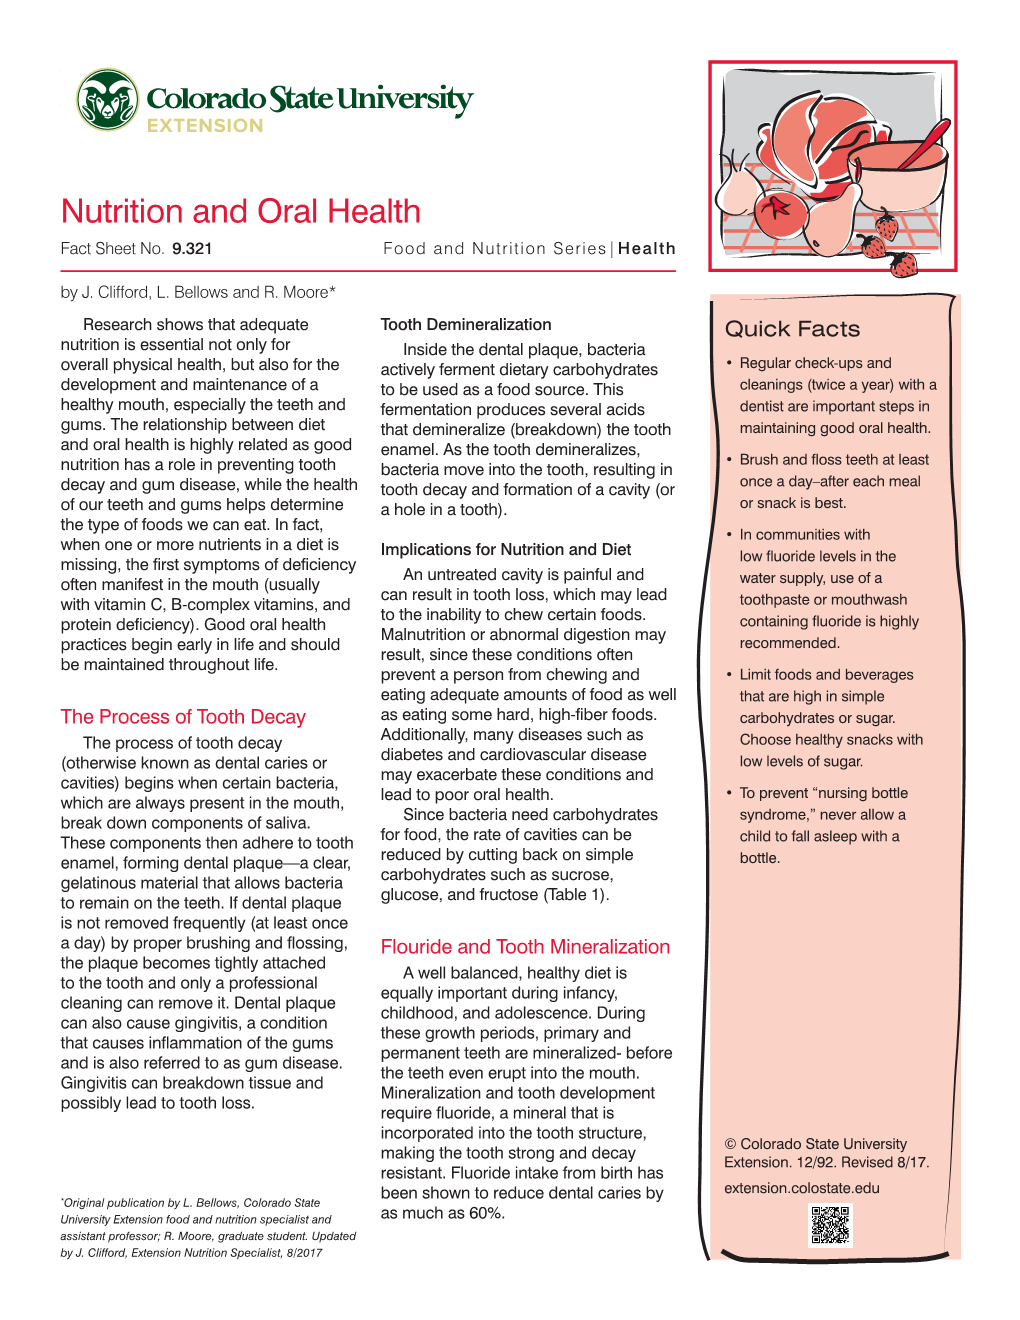 Nutrition and Oral Health Fact Sheet No